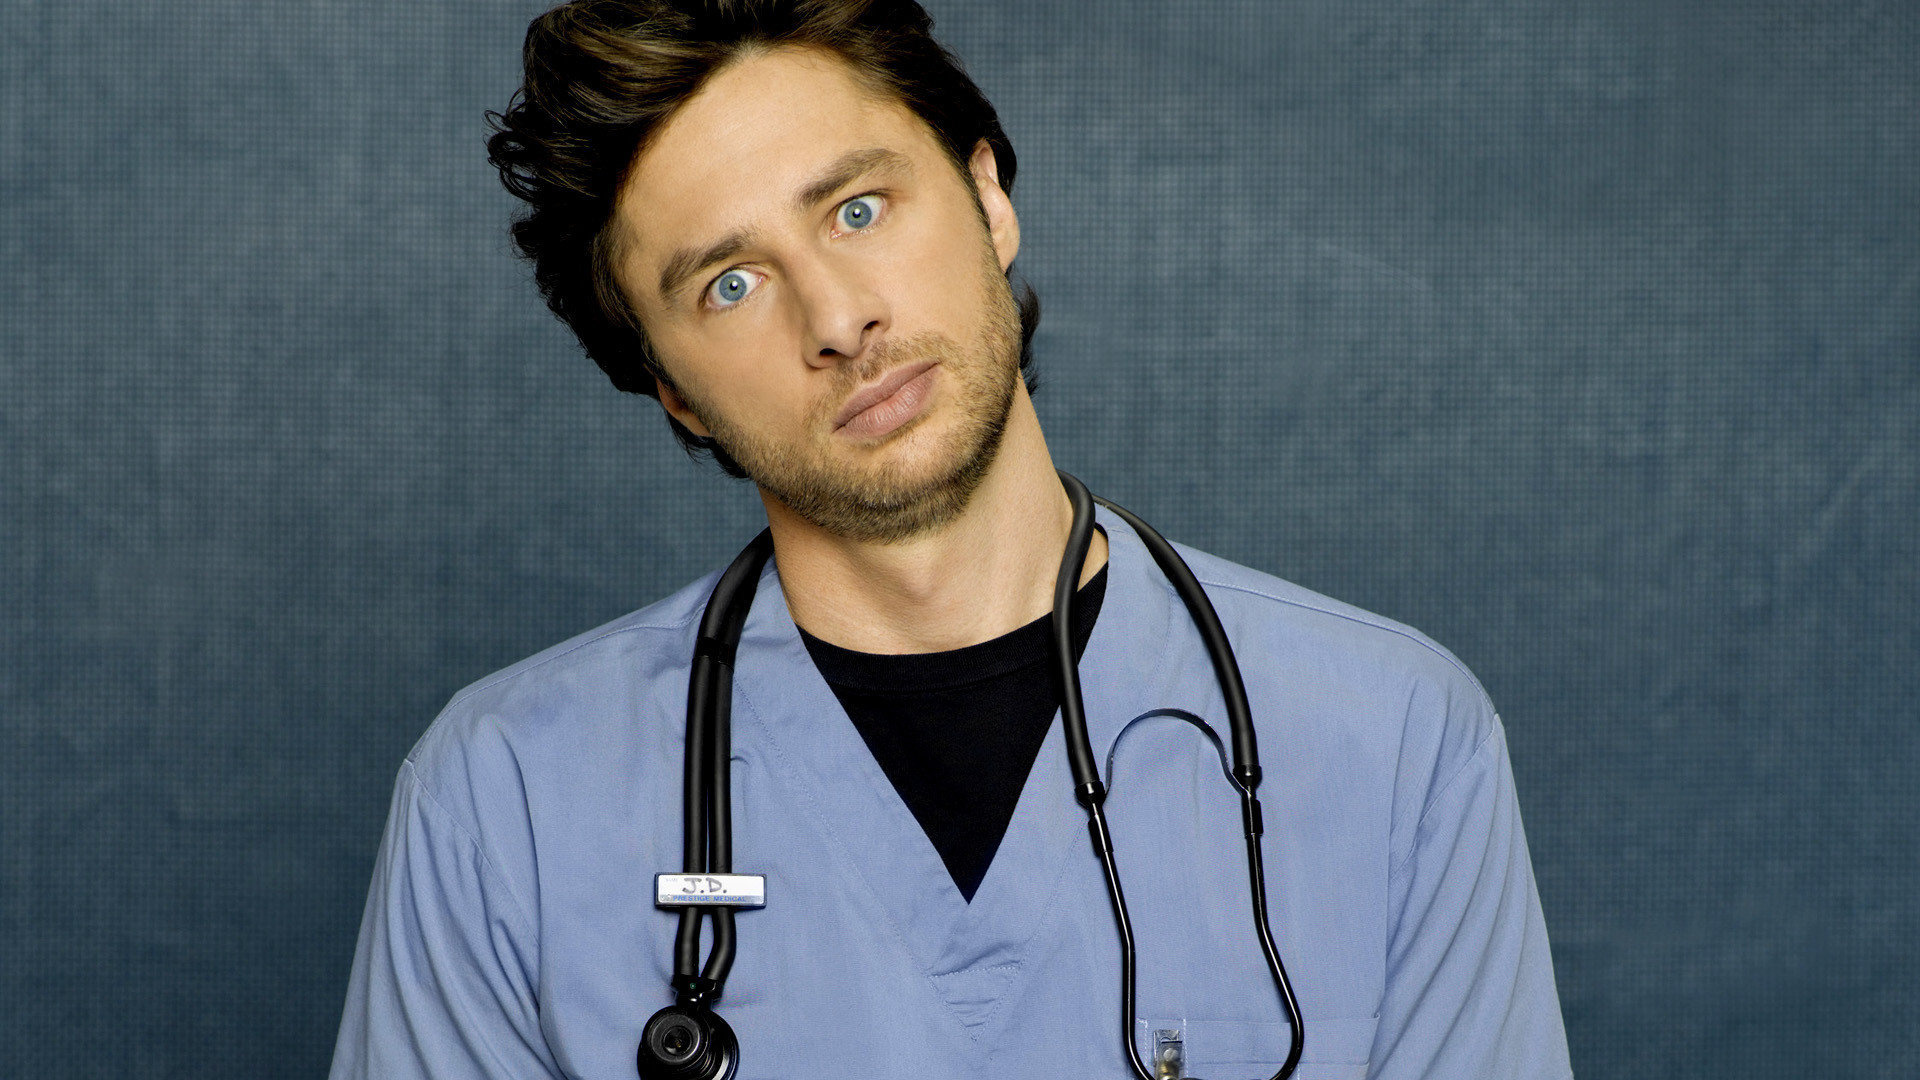 Scrubs (TV Series): J.D., The main protagonist, Portrayed by Zach Braff, First seen in the pilot episode “My First Day”. 1920x1080 Full HD Wallpaper.